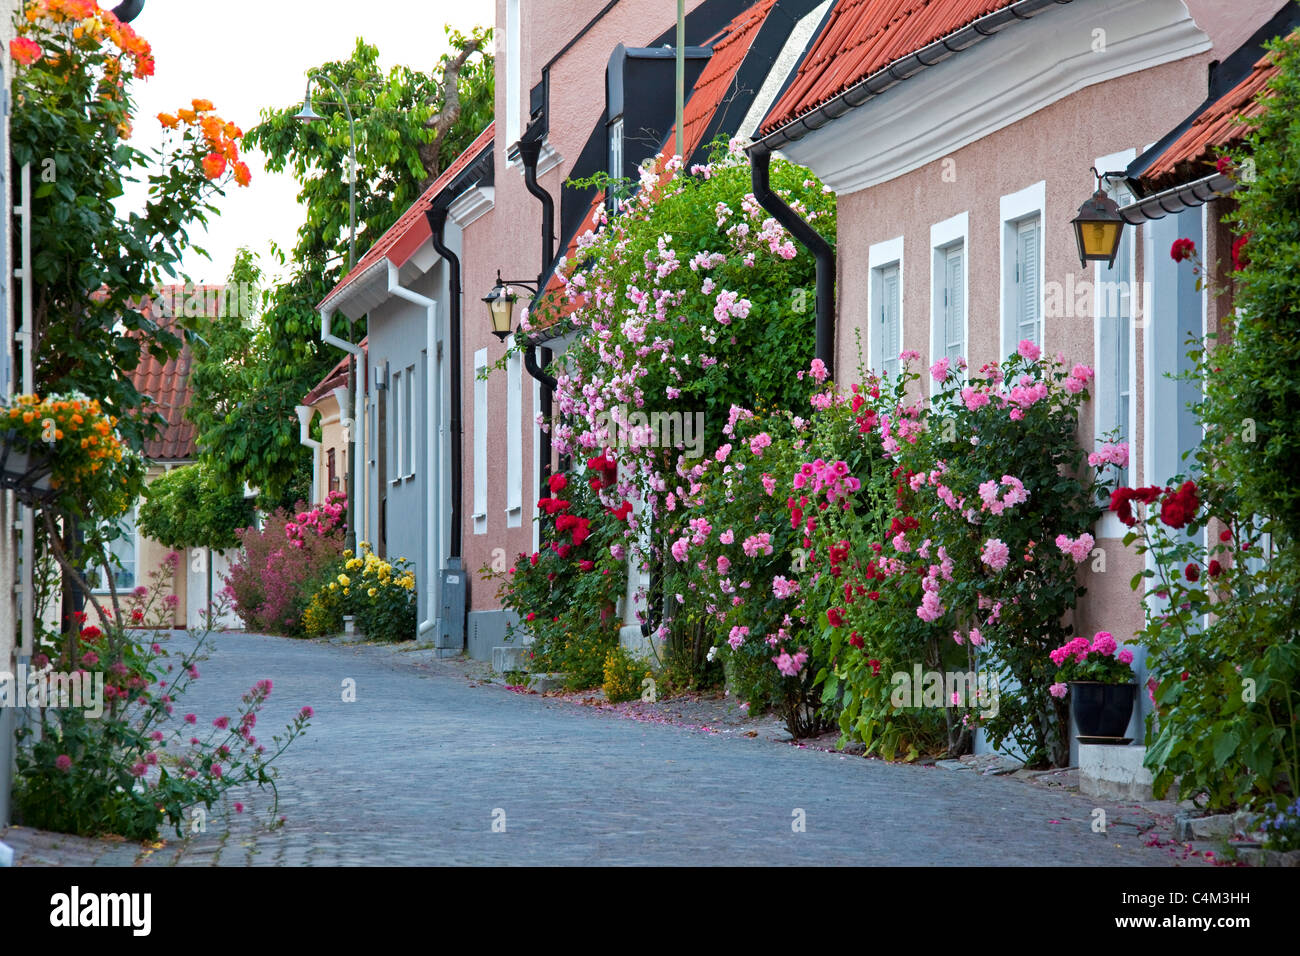 Houses With Flowers Stock Photos & Houses With Flowers Stock ...